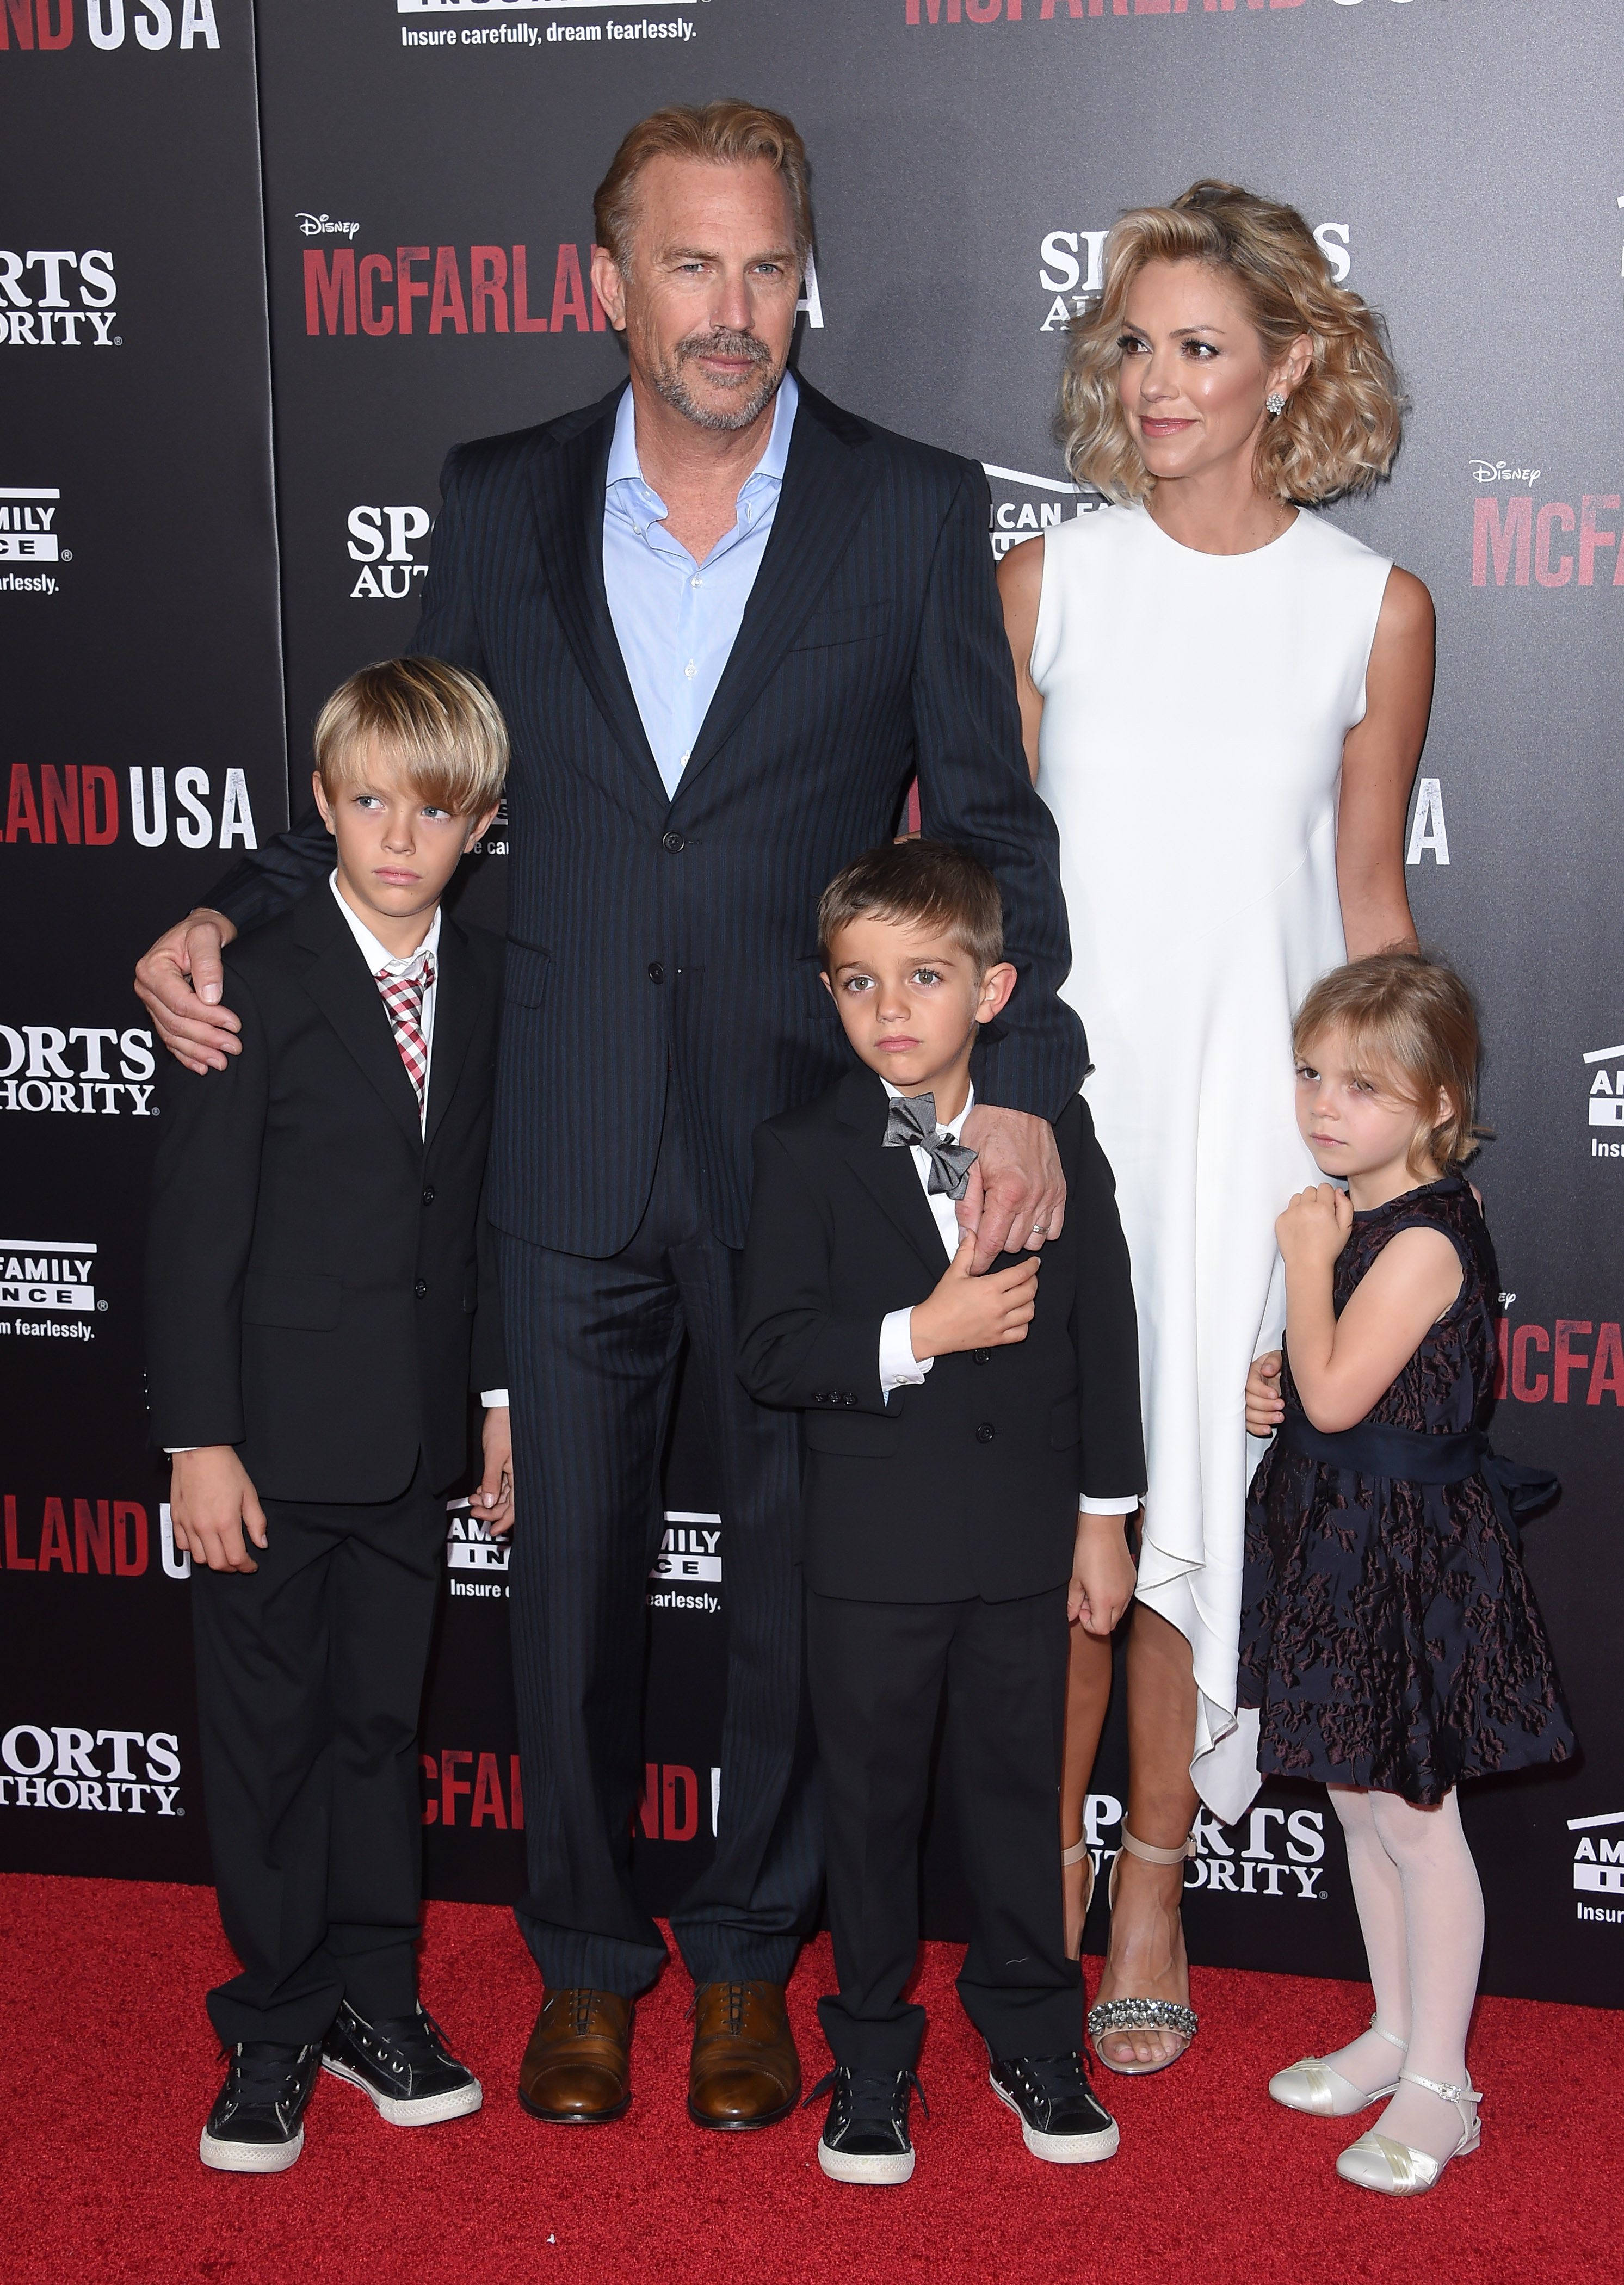 Kevin Costner and Christine Baumgartner with their kids, Cayden, Hayes and Grace Costner at the premiere of "McFarland, USA" in Hollywood, California on February 9, 2015 | Source: Getty Images